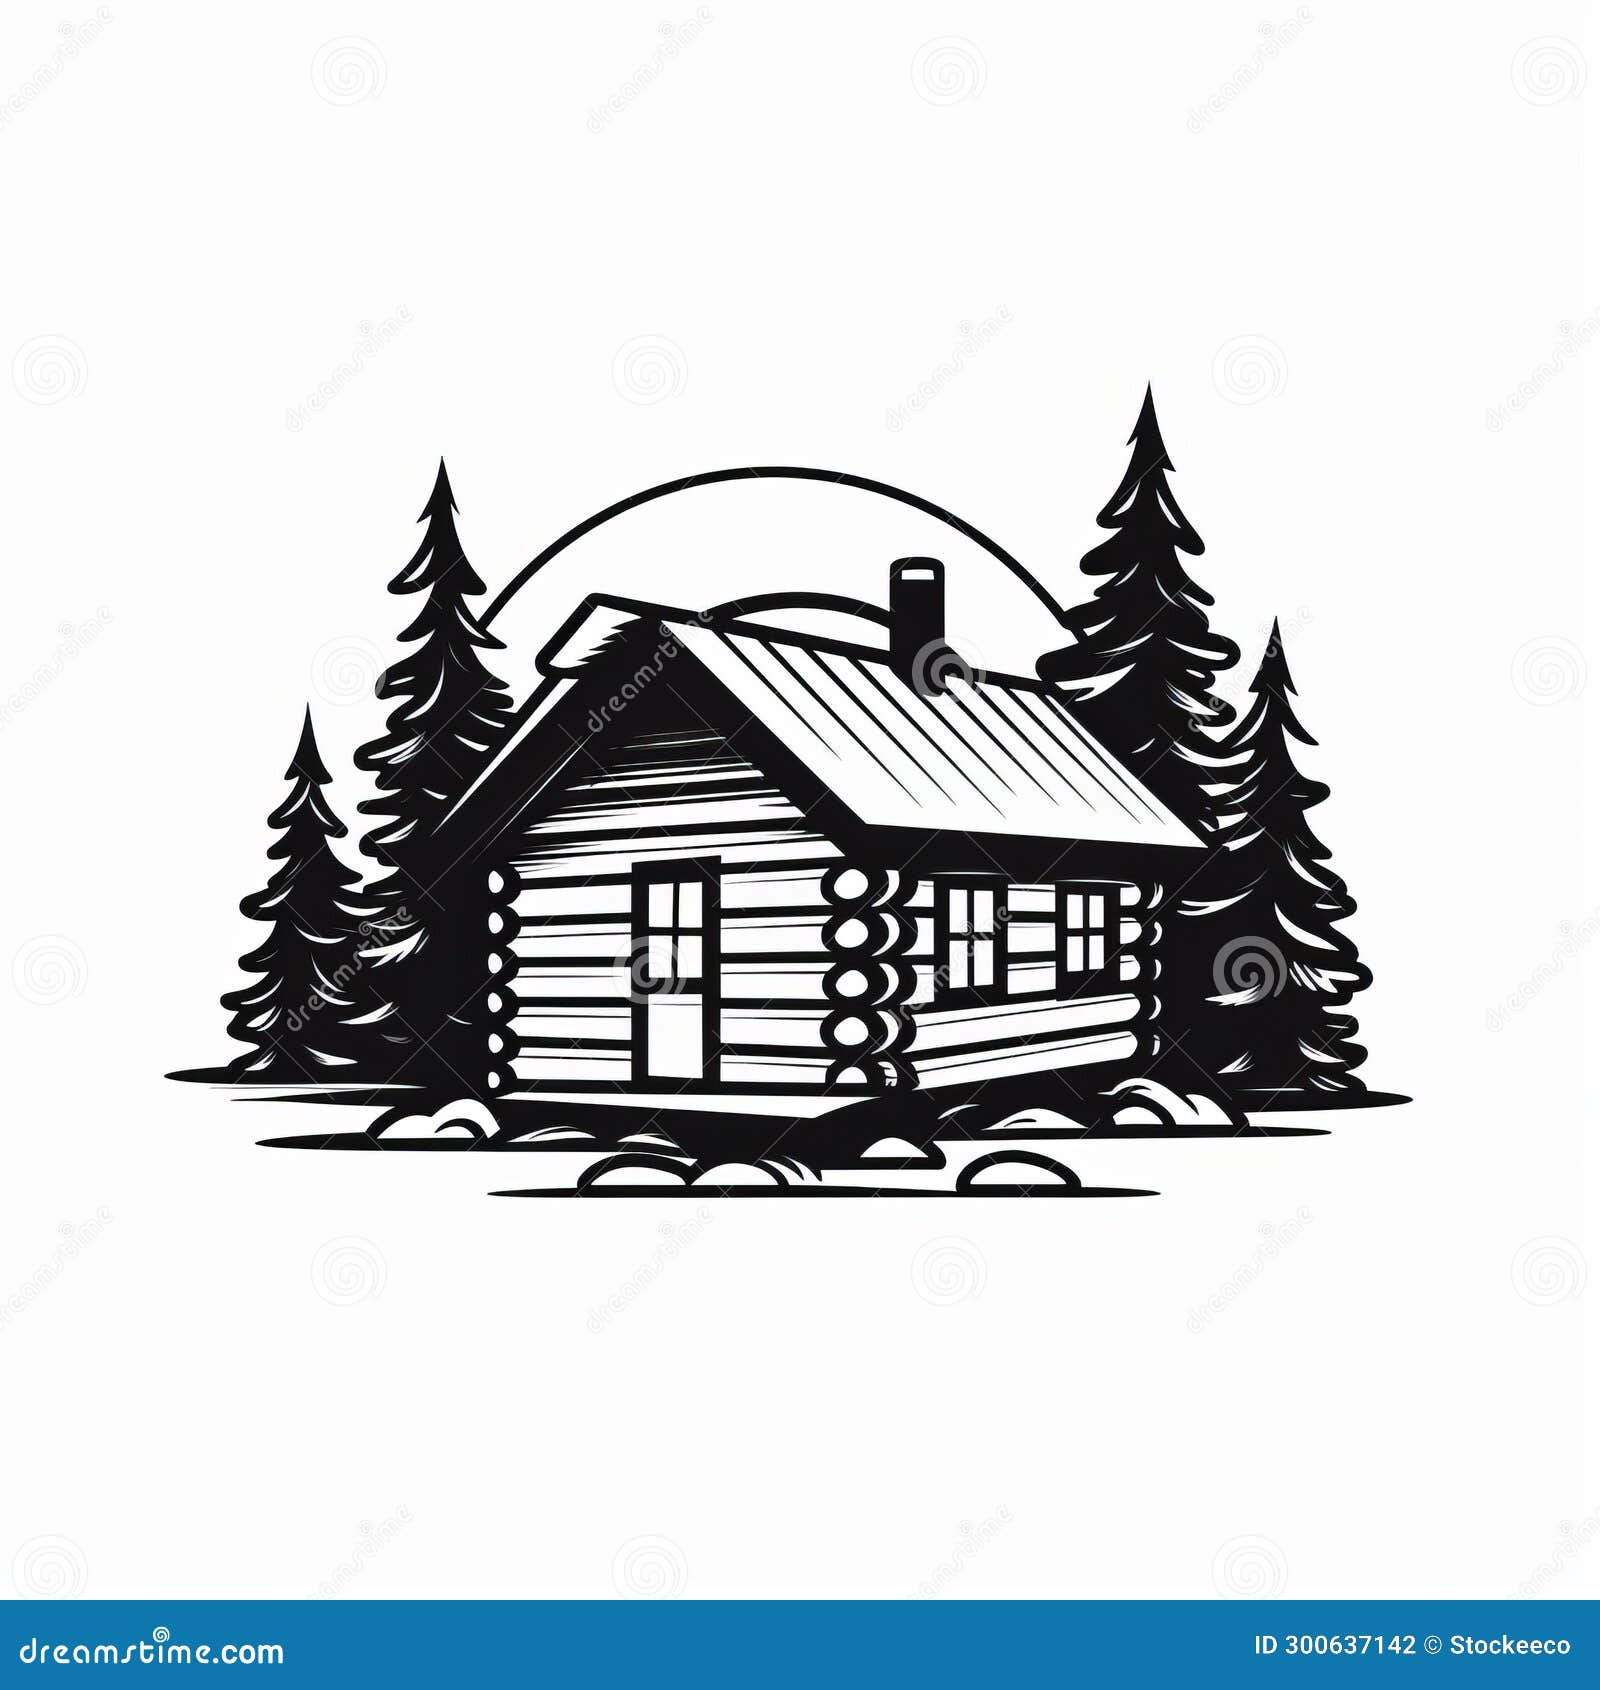 Simple Cabin Logo Vector Illustration in Black and White Stock ...